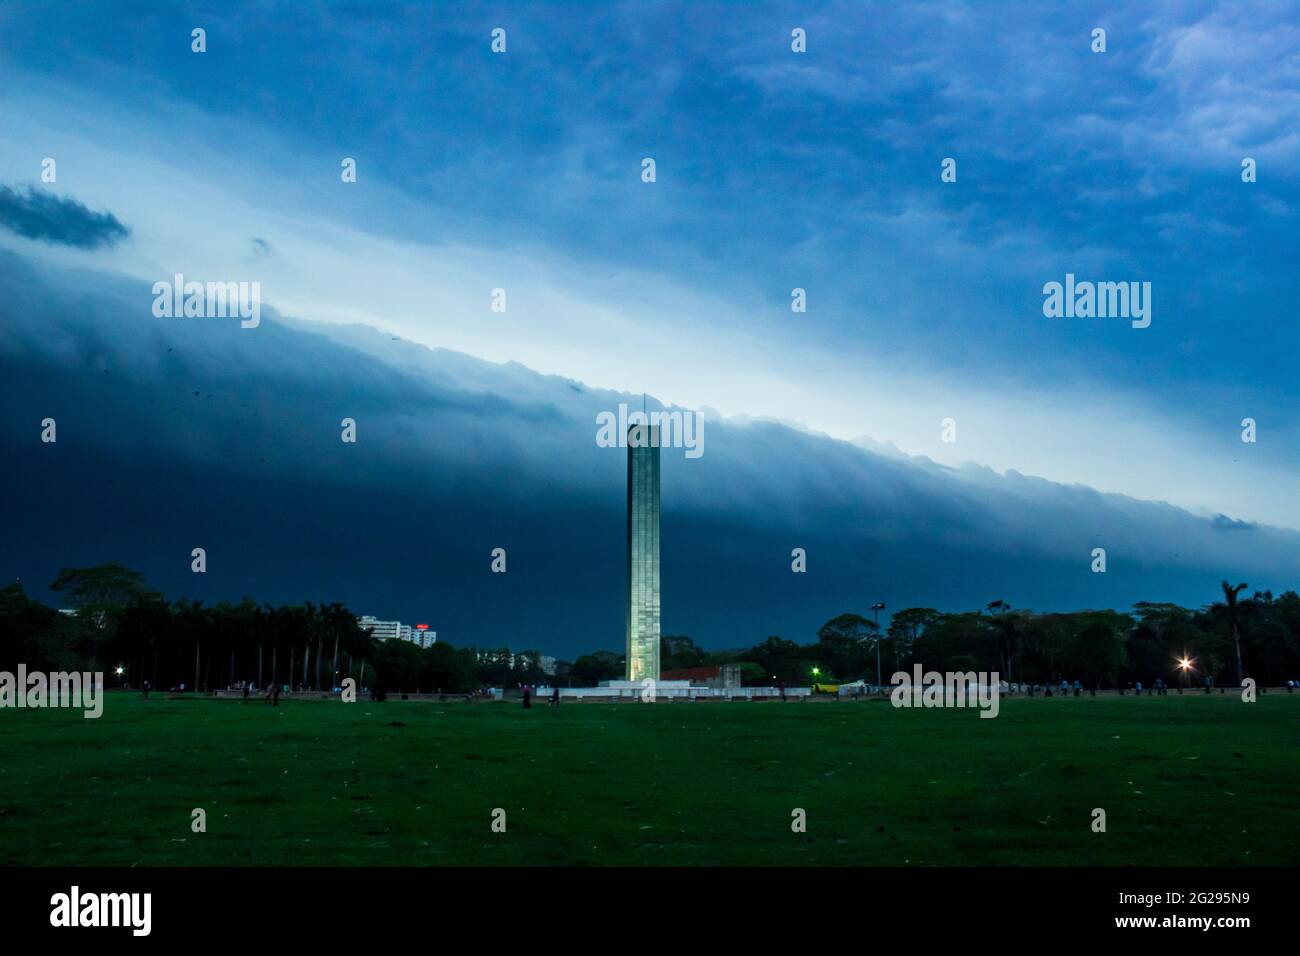 National museum tower under the cloudy sky. This image captured on April 9, 2019, from Dhaka, Bangladesh, South Asia Stock Photo